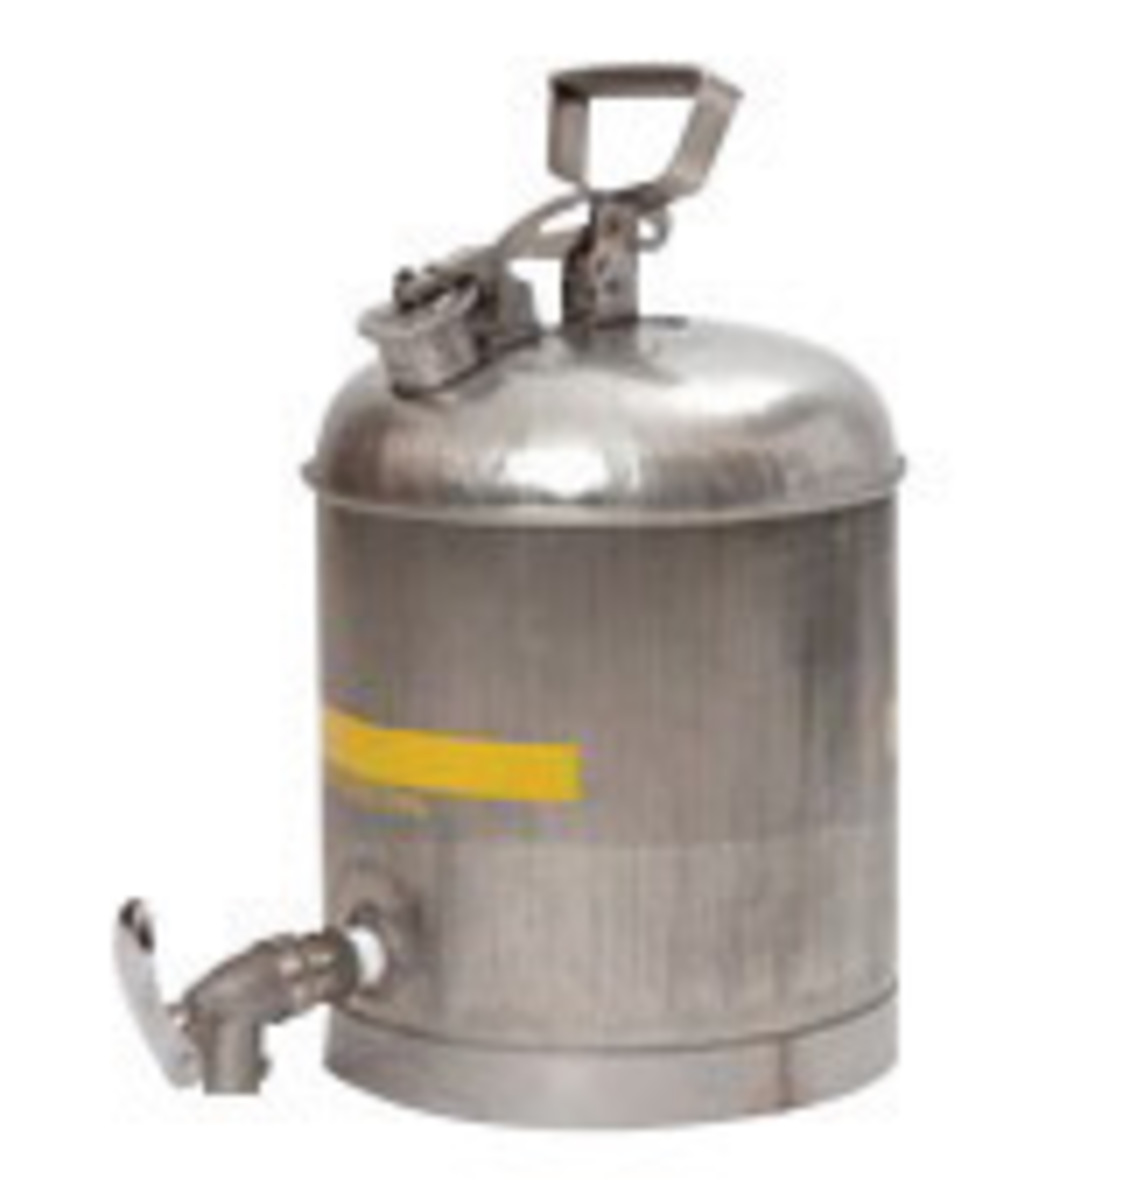 Eagle 5 Gallon Stainless Steel Safety Can With Stainless ECO Faucet And Neoprene Gasket (For Flammable Liquids)